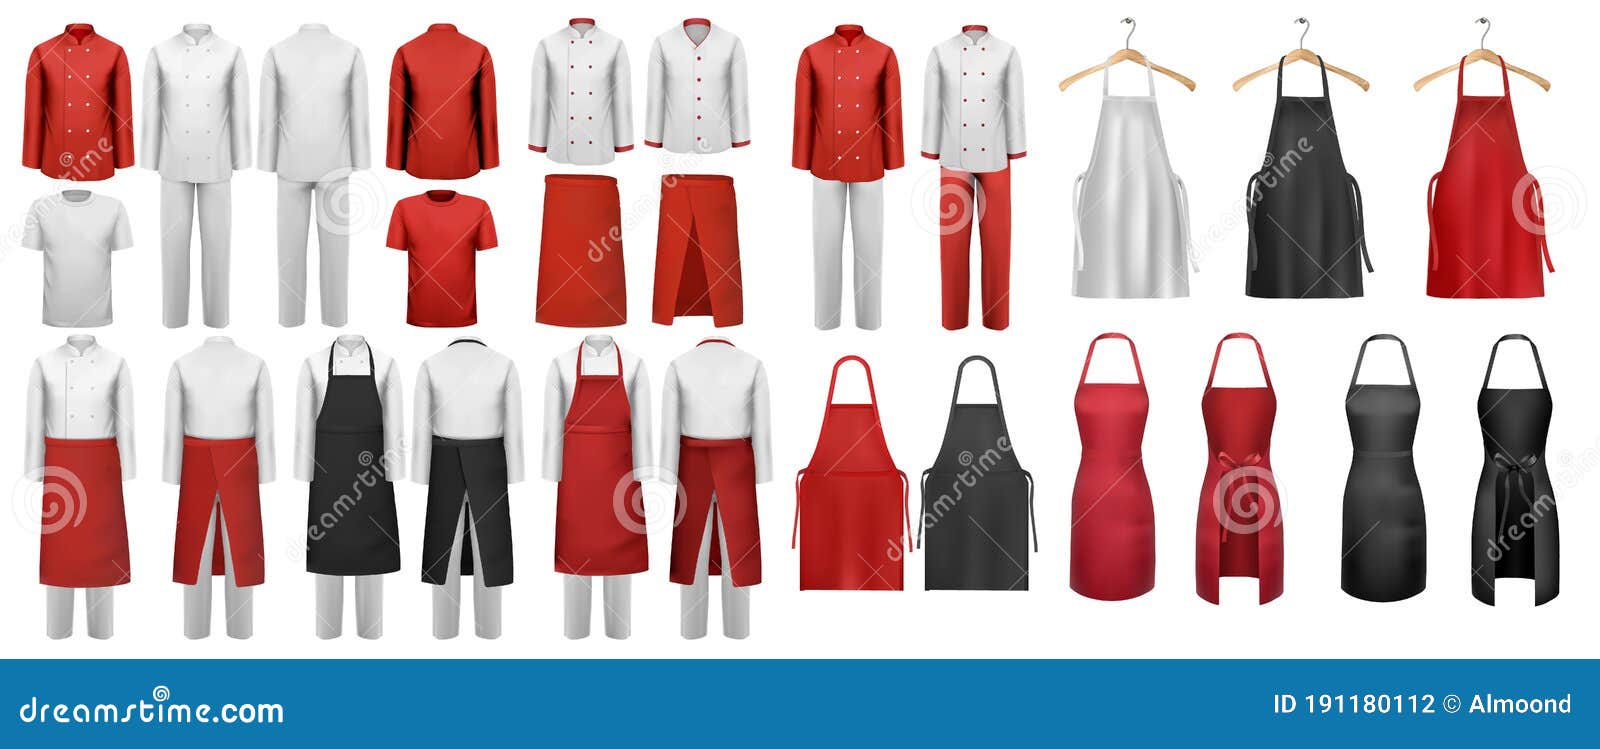 big set of culinary clothing, white and red suits and aprons.